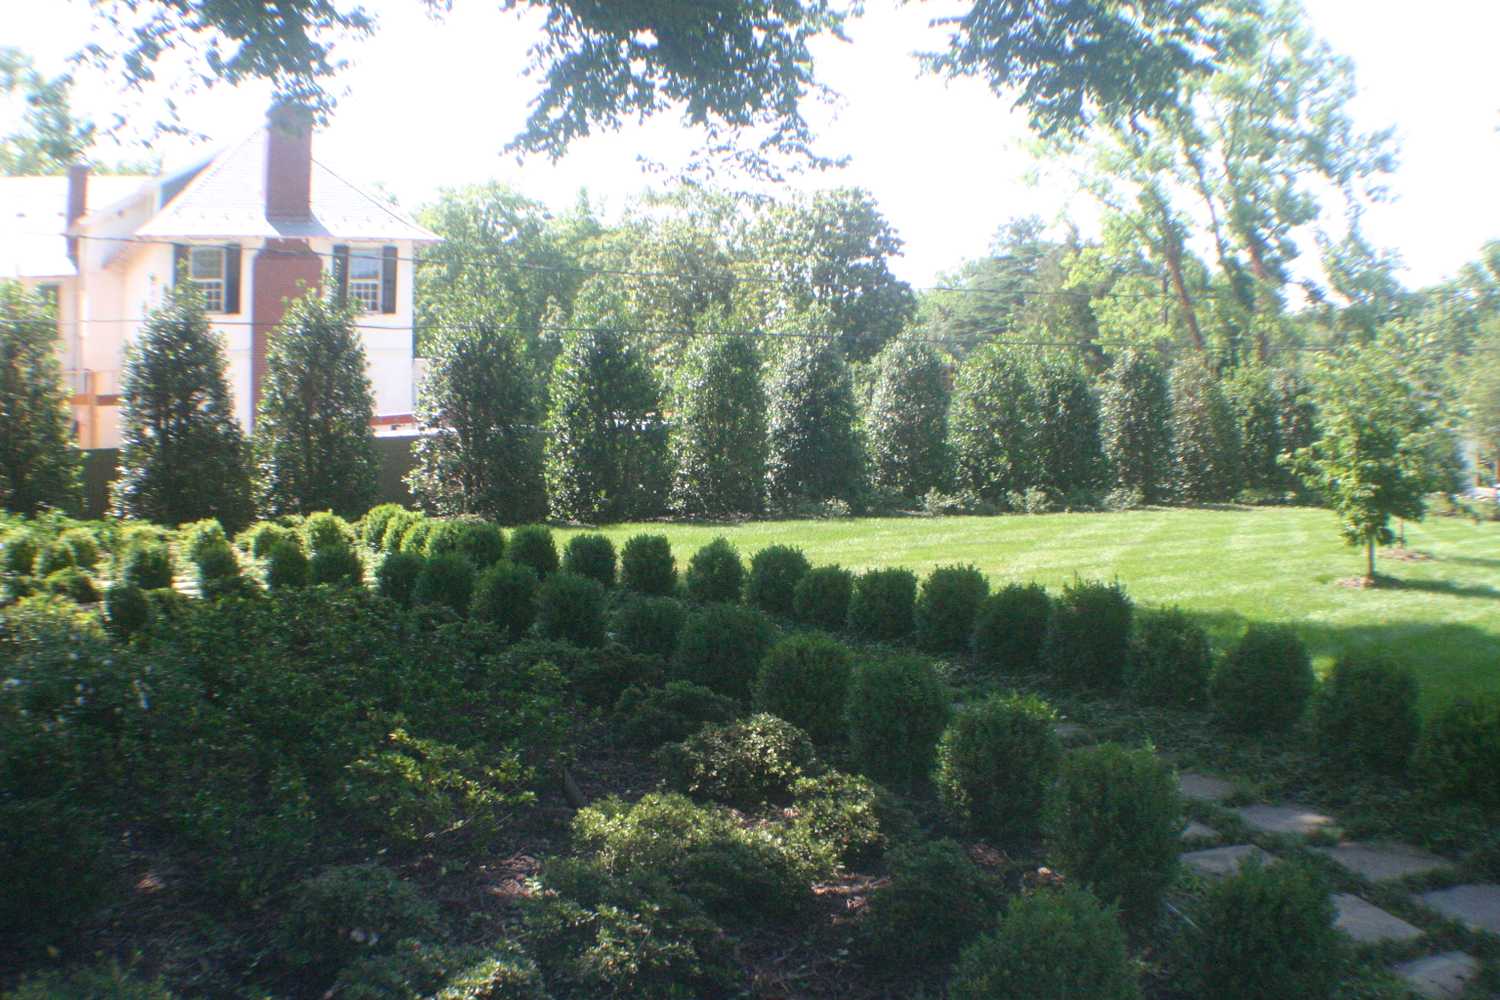 Richmond Commercial Landscaping